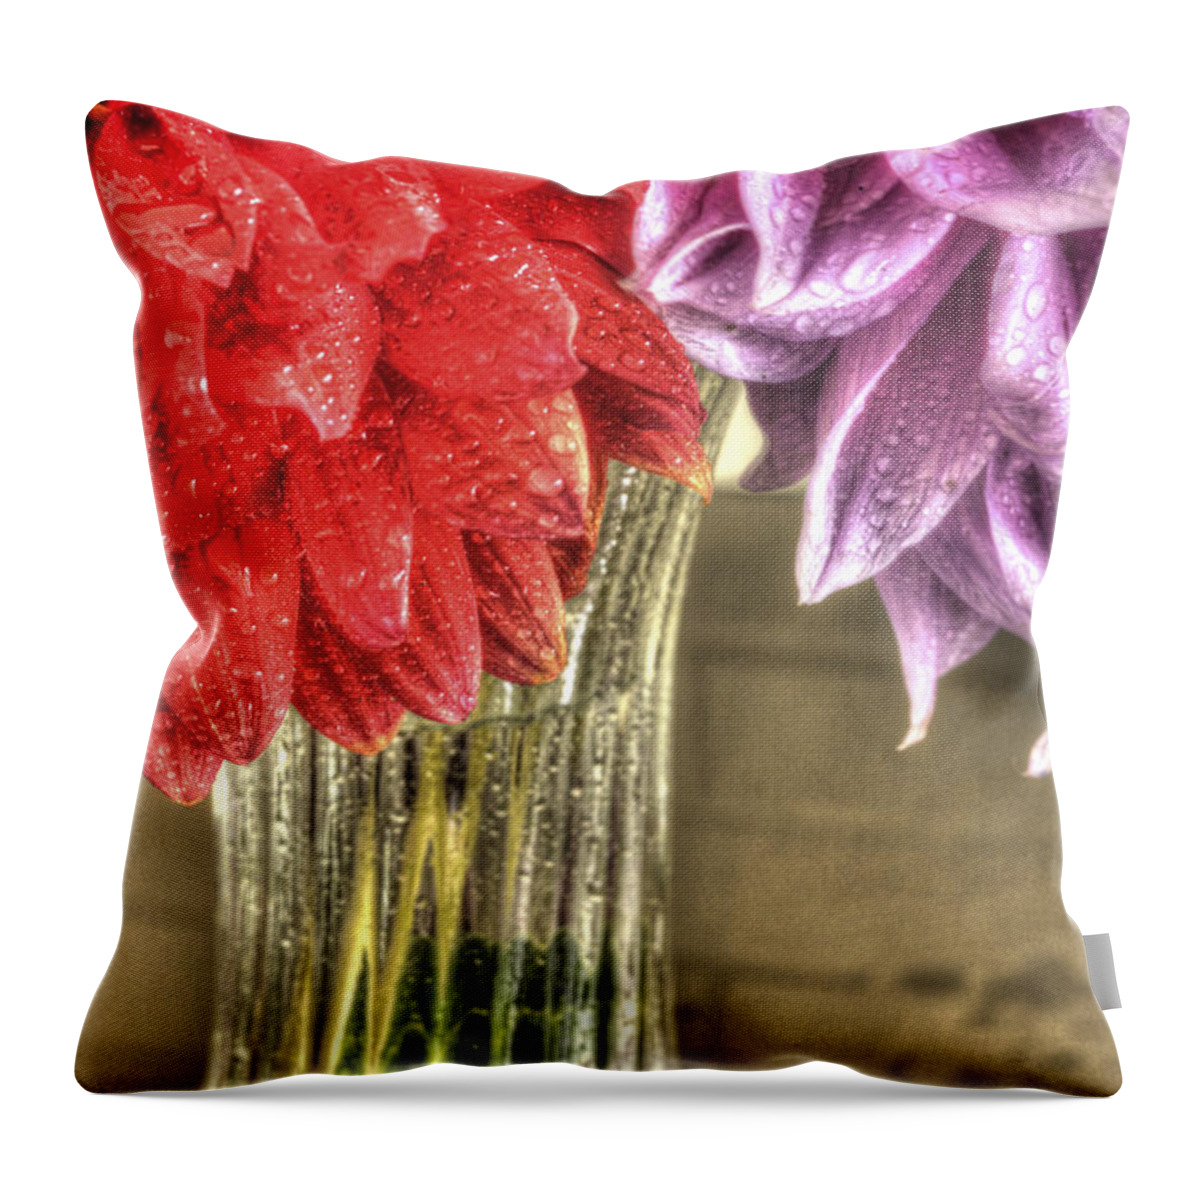 Dahlia Throw Pillow featuring the photograph Two Dahlias - 0852 by Paul W Faust - Impressions of Light